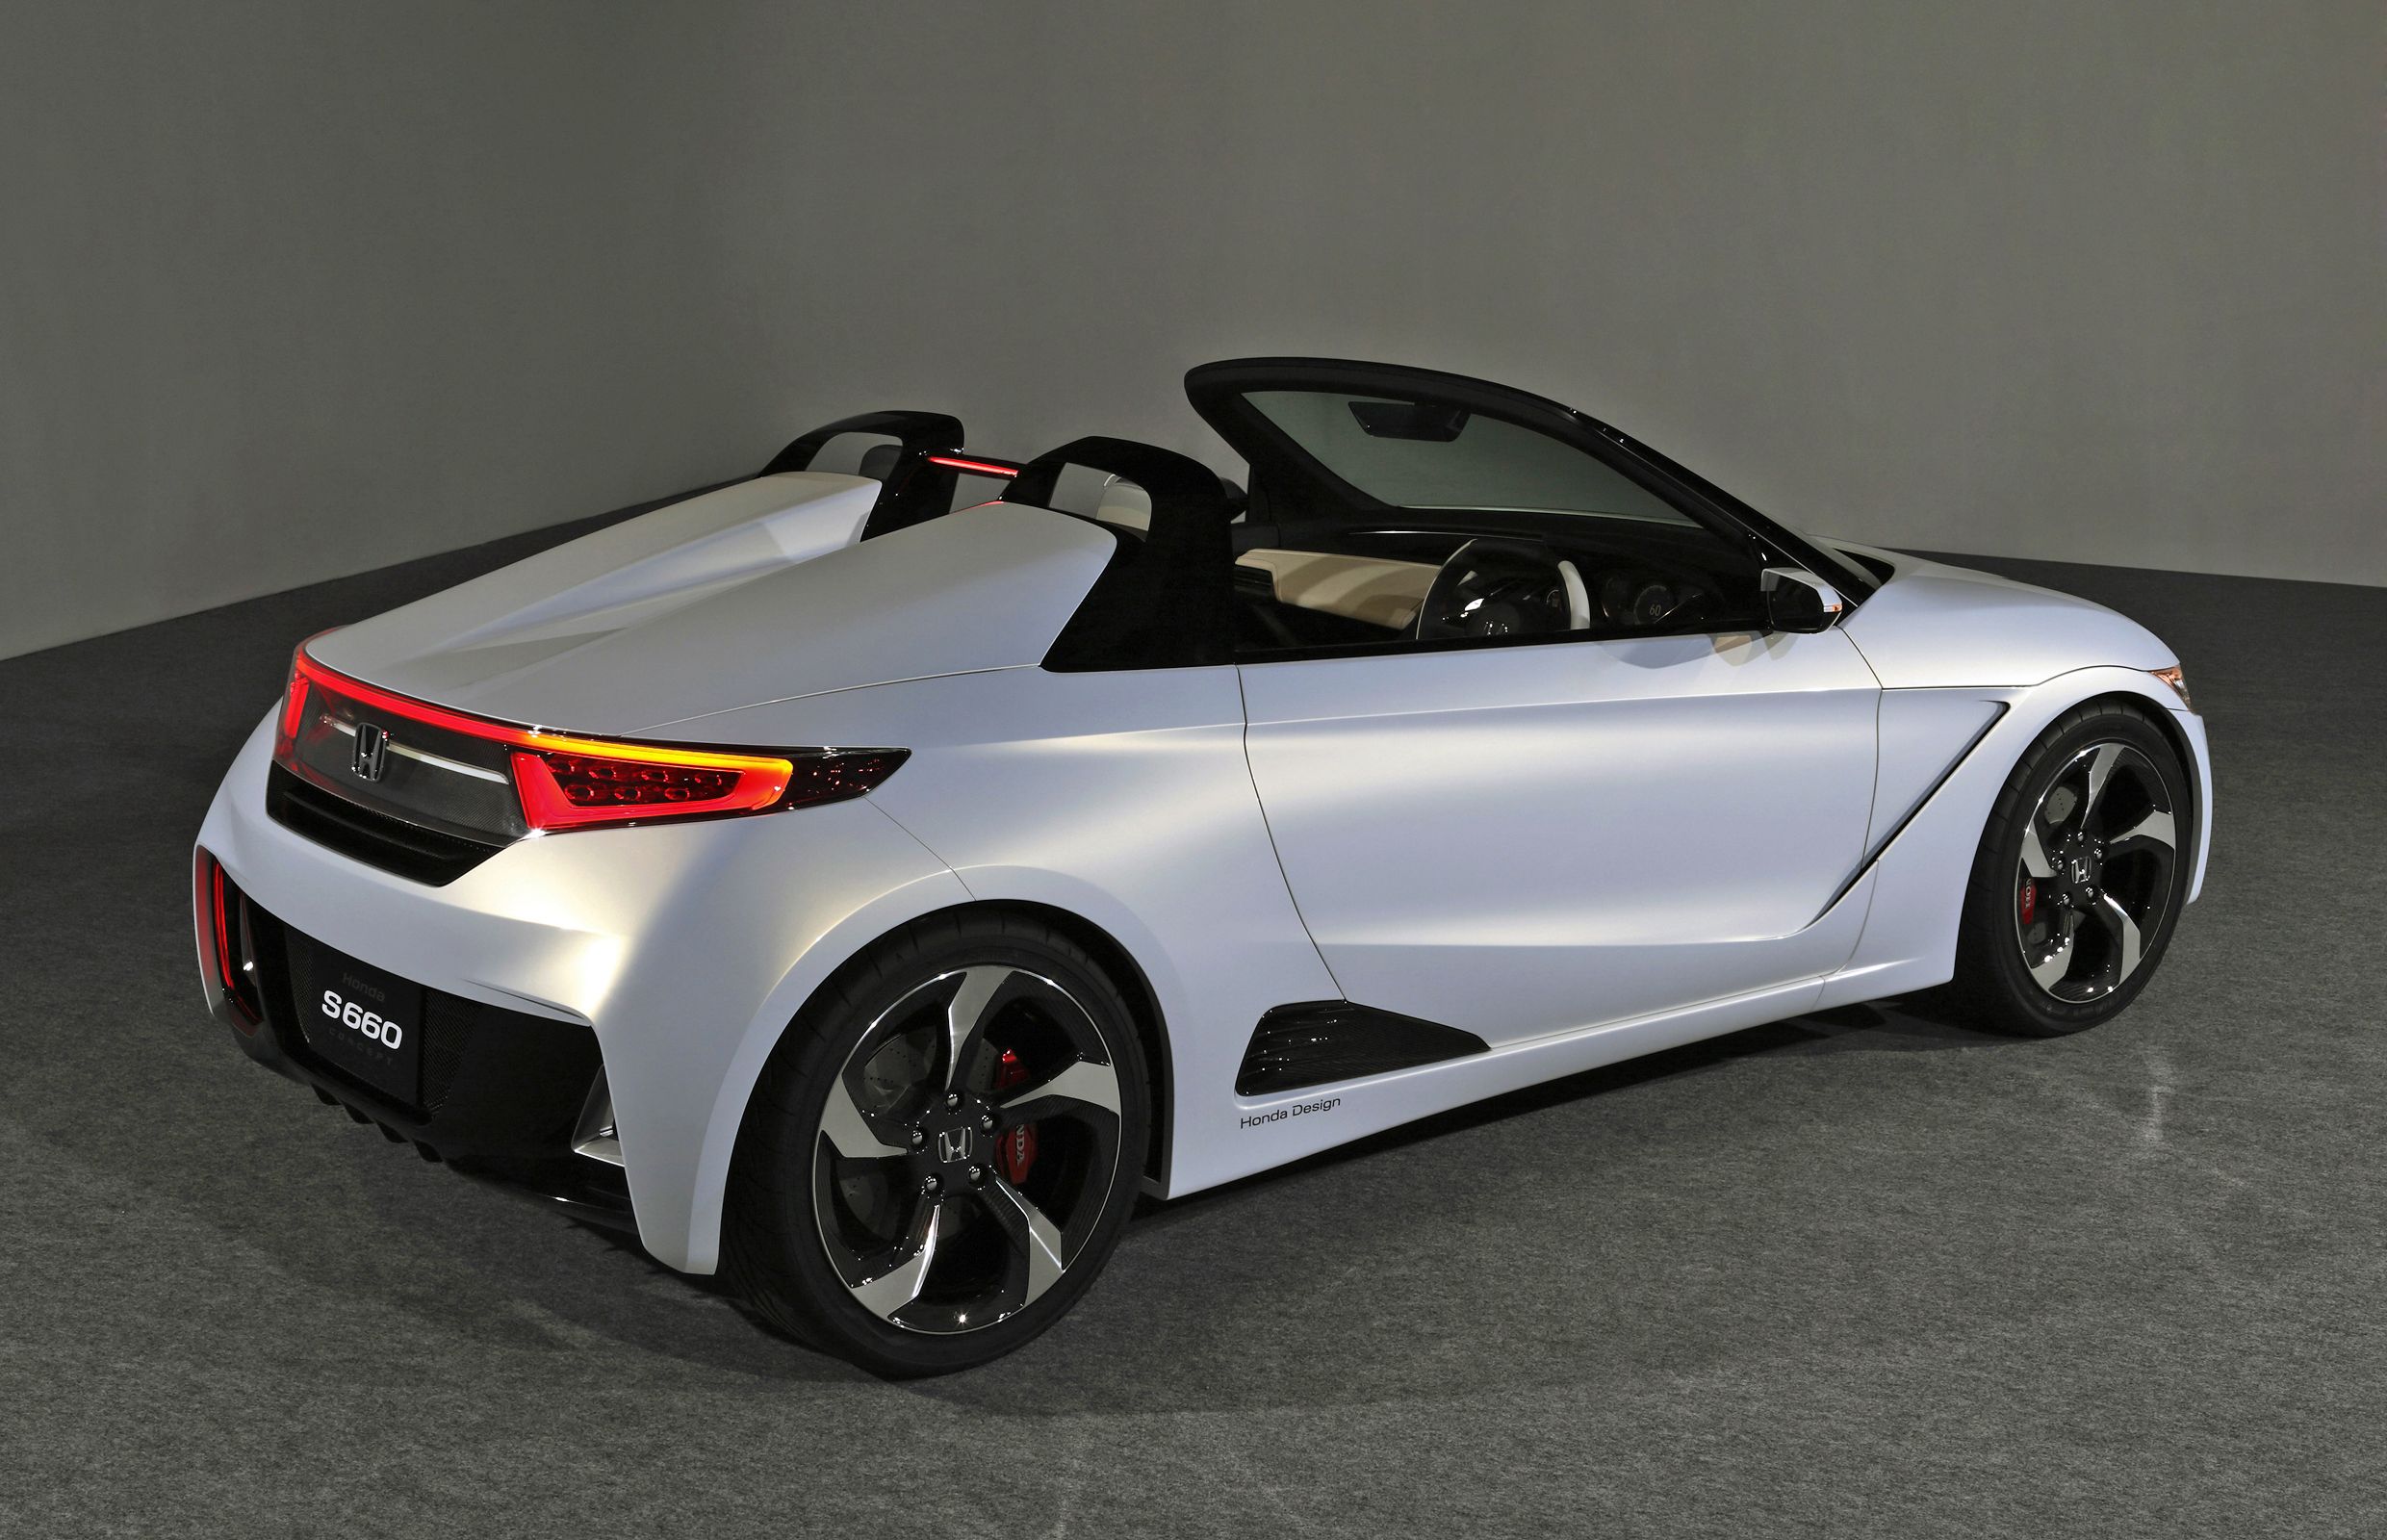 Funky Honda S660 won't come to North America | Driving